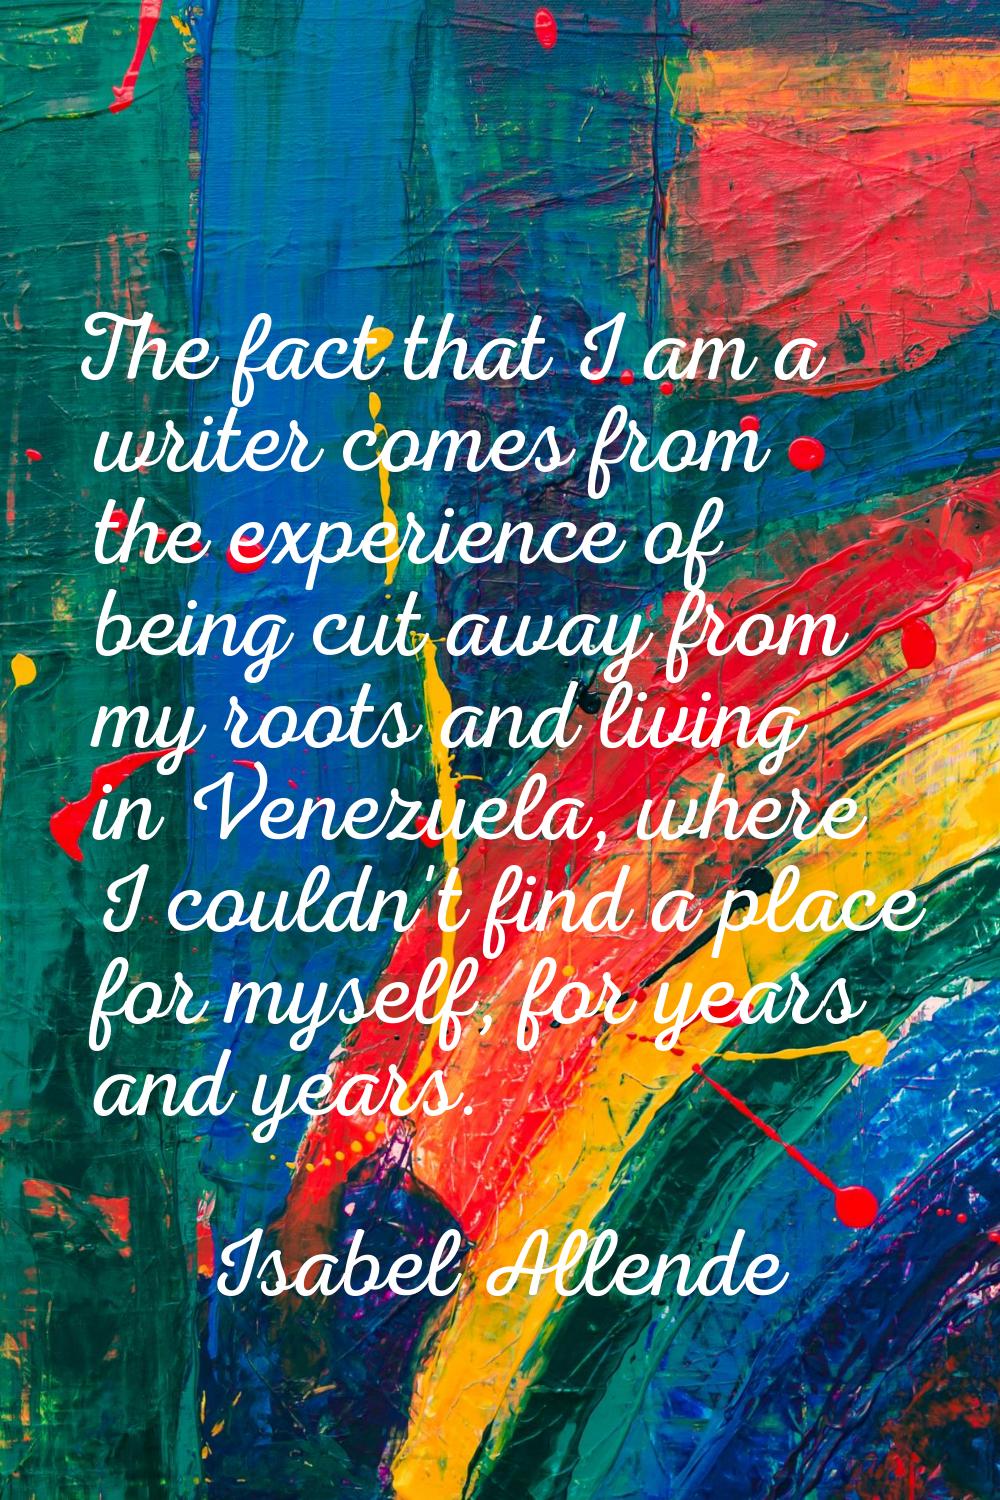 The fact that I am a writer comes from the experience of being cut away from my roots and living in